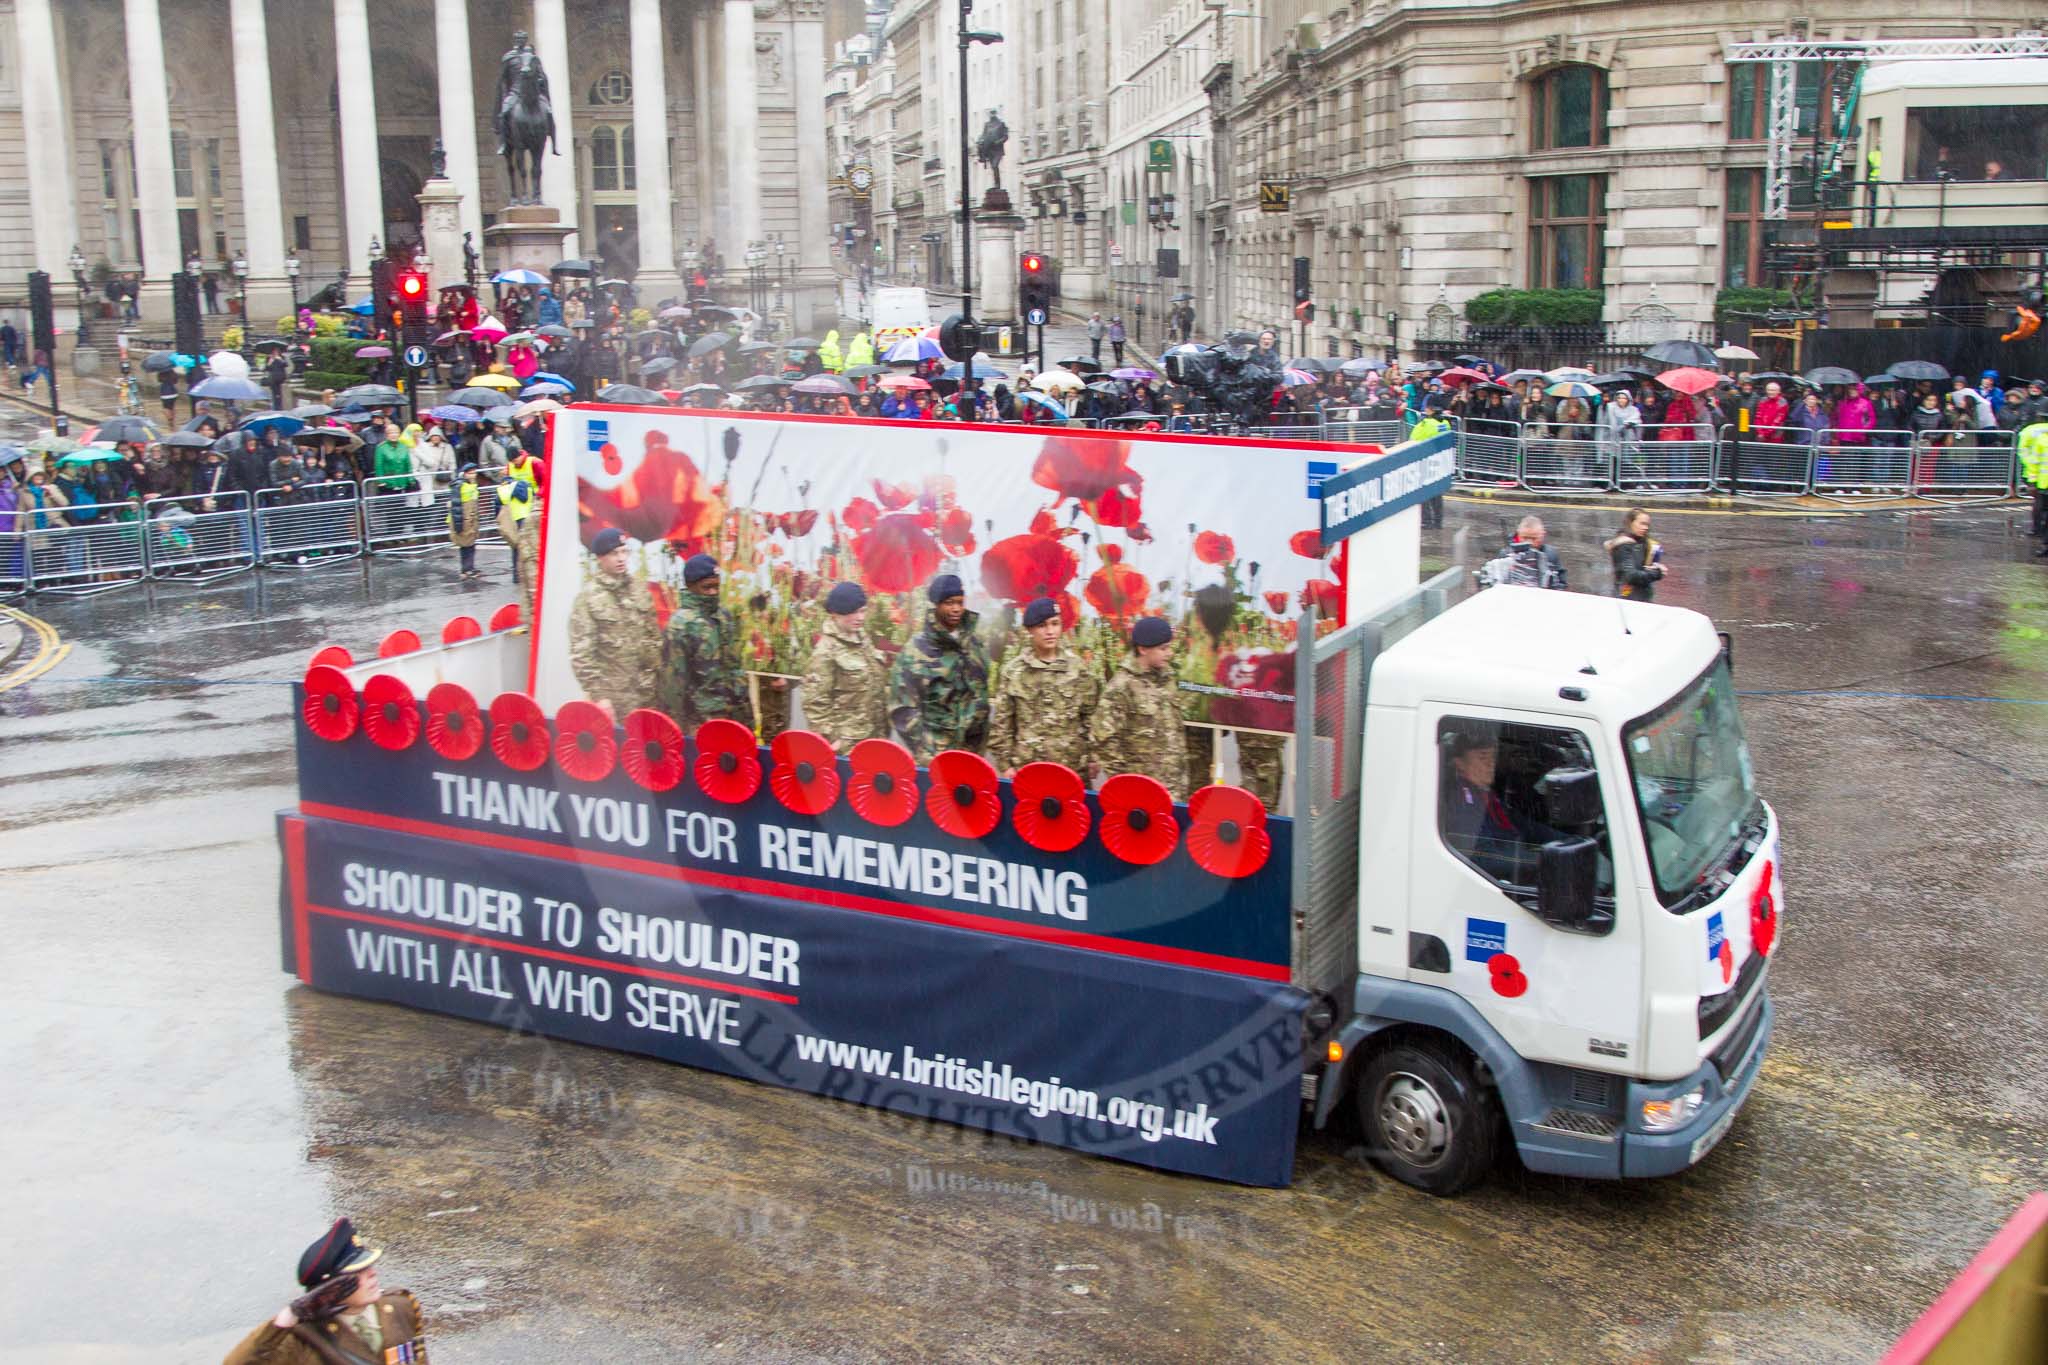 Lord Mayor's Show 2013: 115-Royal British Legion-stands @Shoulder to shoulder with all who serve'..
Press stand opposite Mansion House, City of London,
London,
Greater London,
United Kingdom,
on 09 November 2013 at 12:02, image #1328